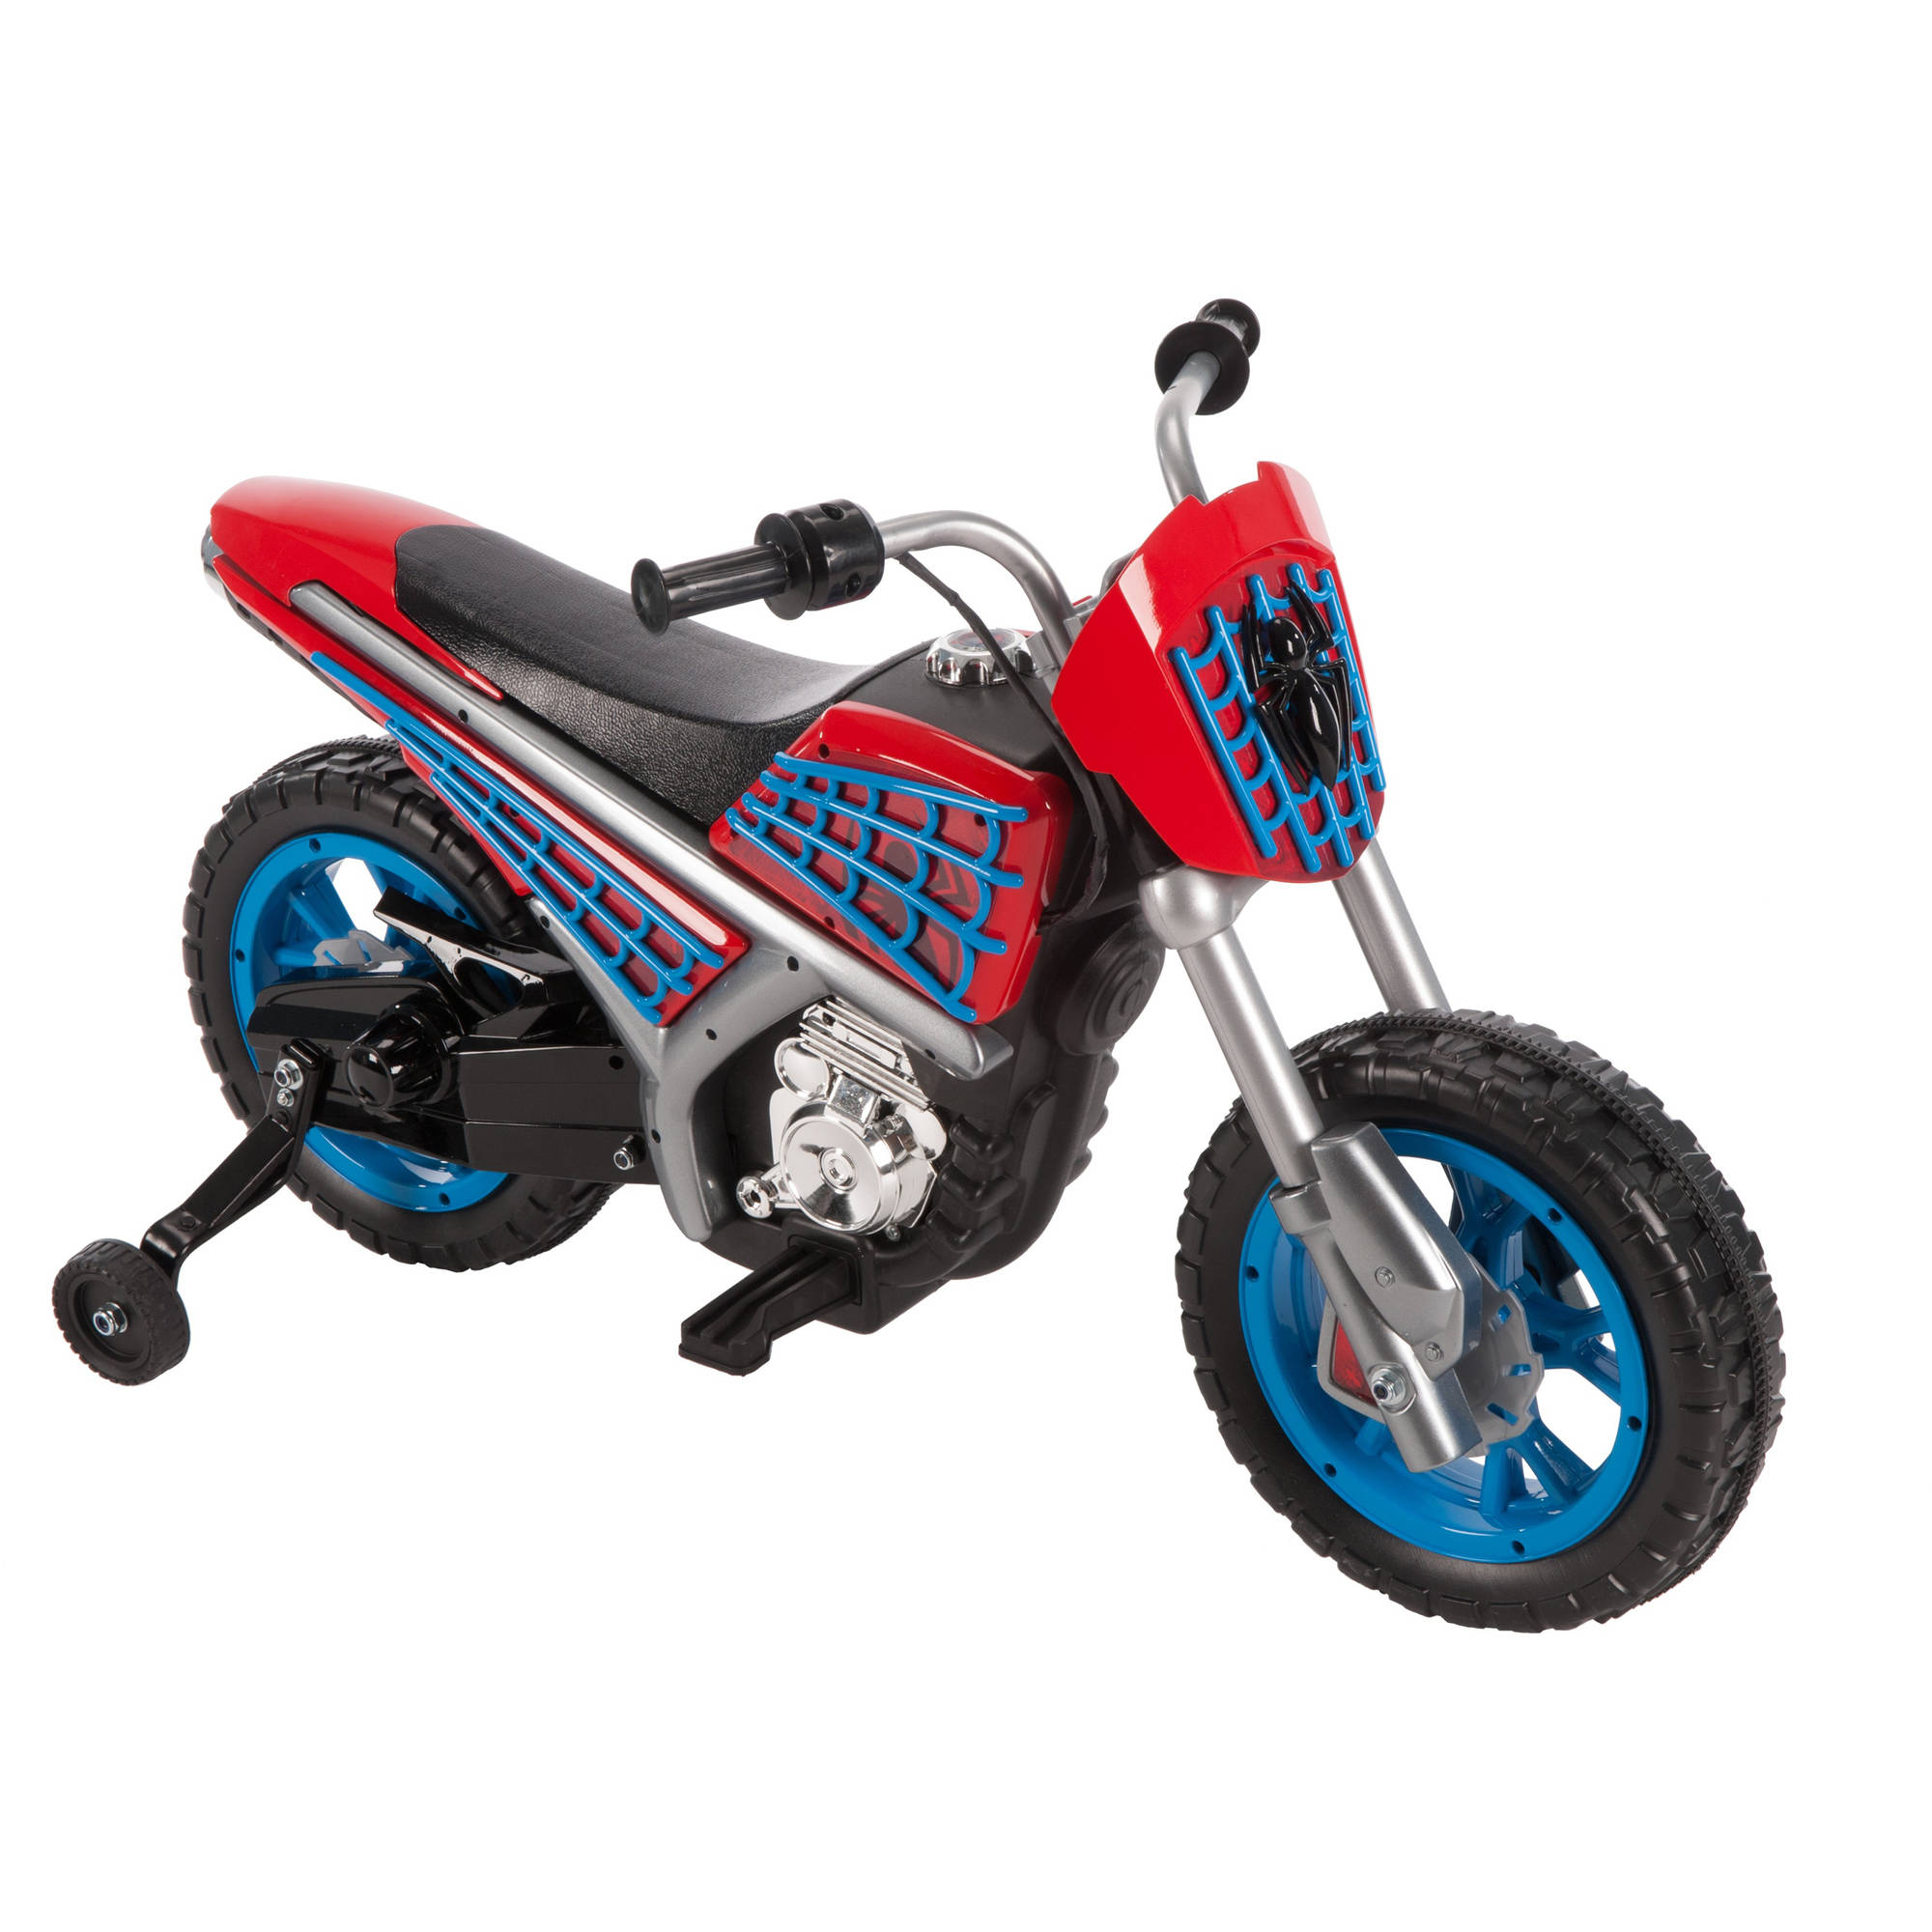 Marvel Spider-Man 6-Volt Electric Battery-Powered Ride On Toy by Huffy - image 2 of 4